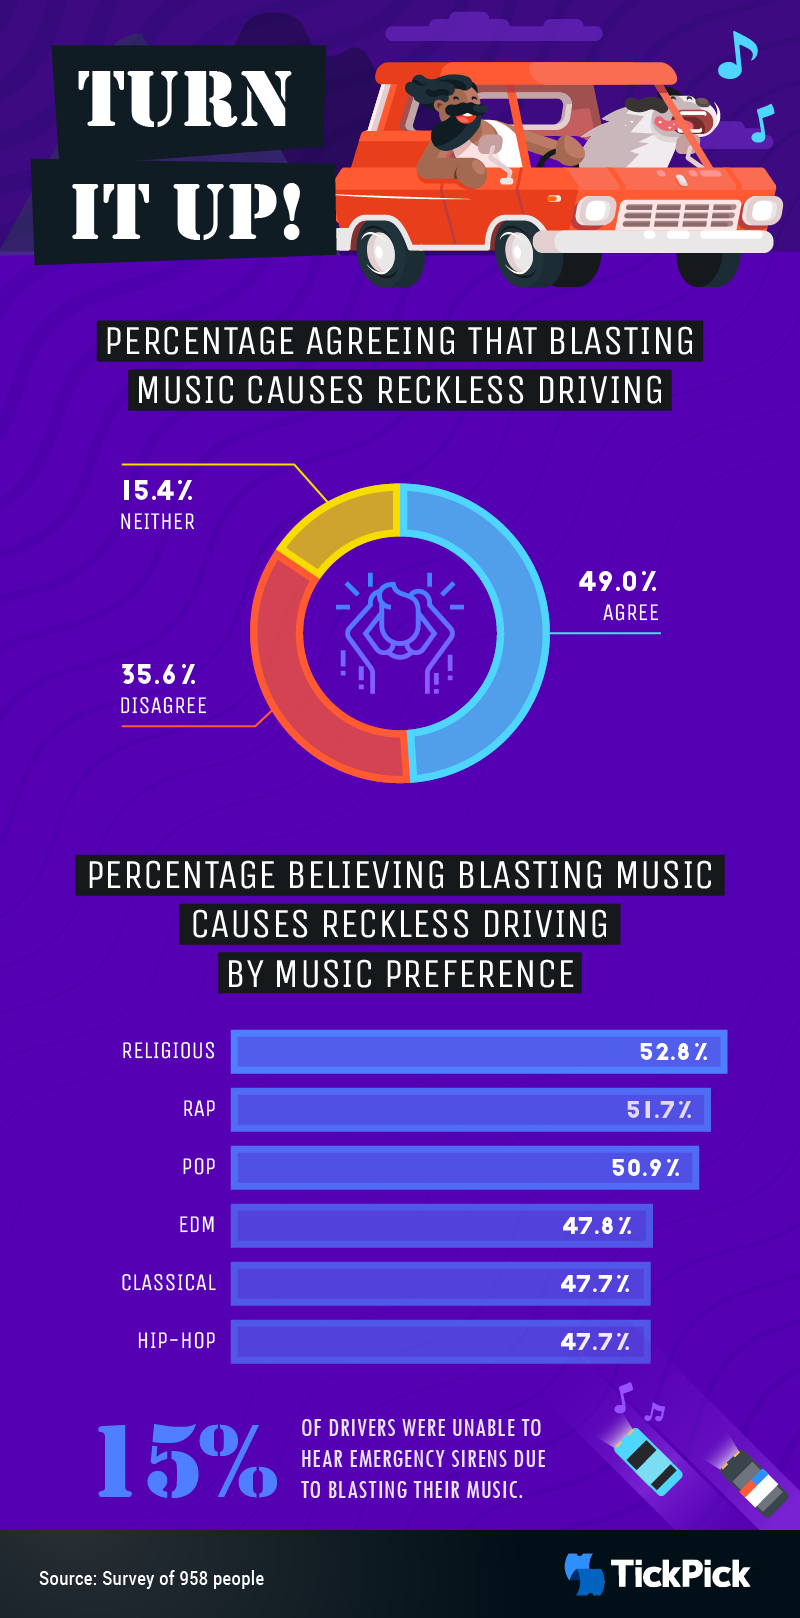 percentage-agreeing-that-blasting-music-causes-reckless-driving-and-percentage-believing-blasting-music-causes-reckless-driving-by-driver-music-preference